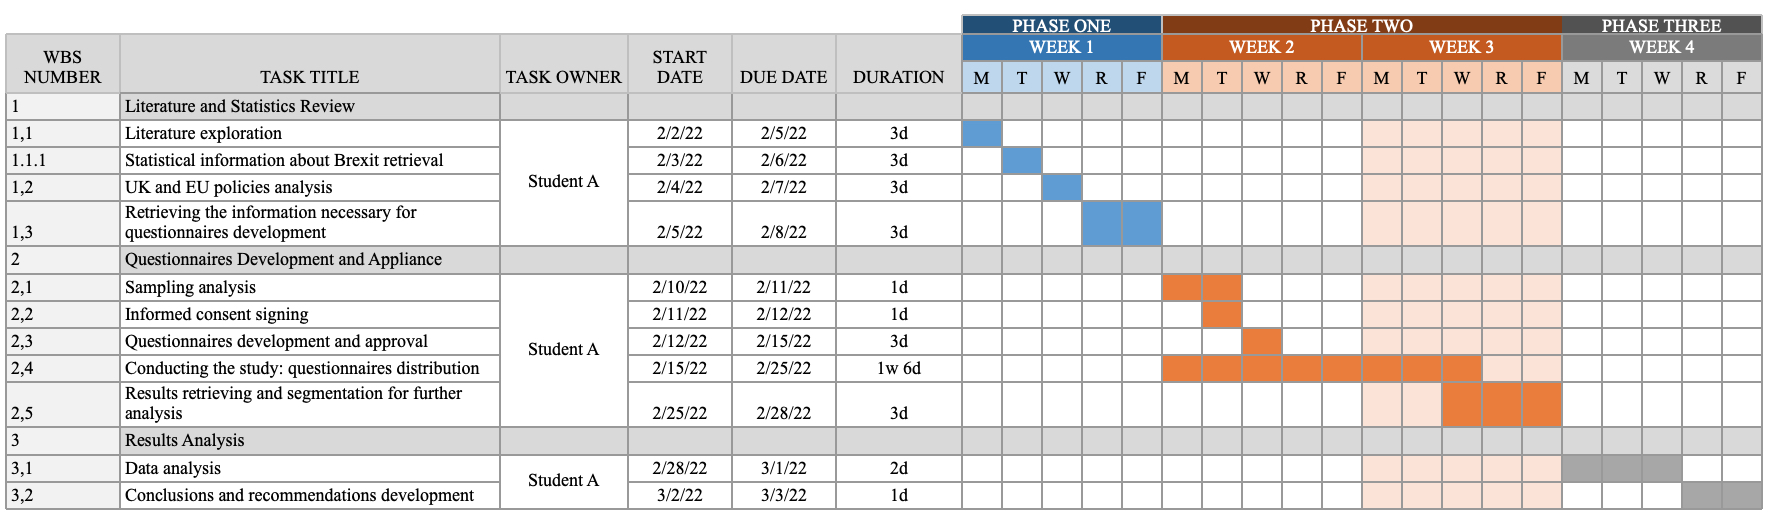 Project Schedul.